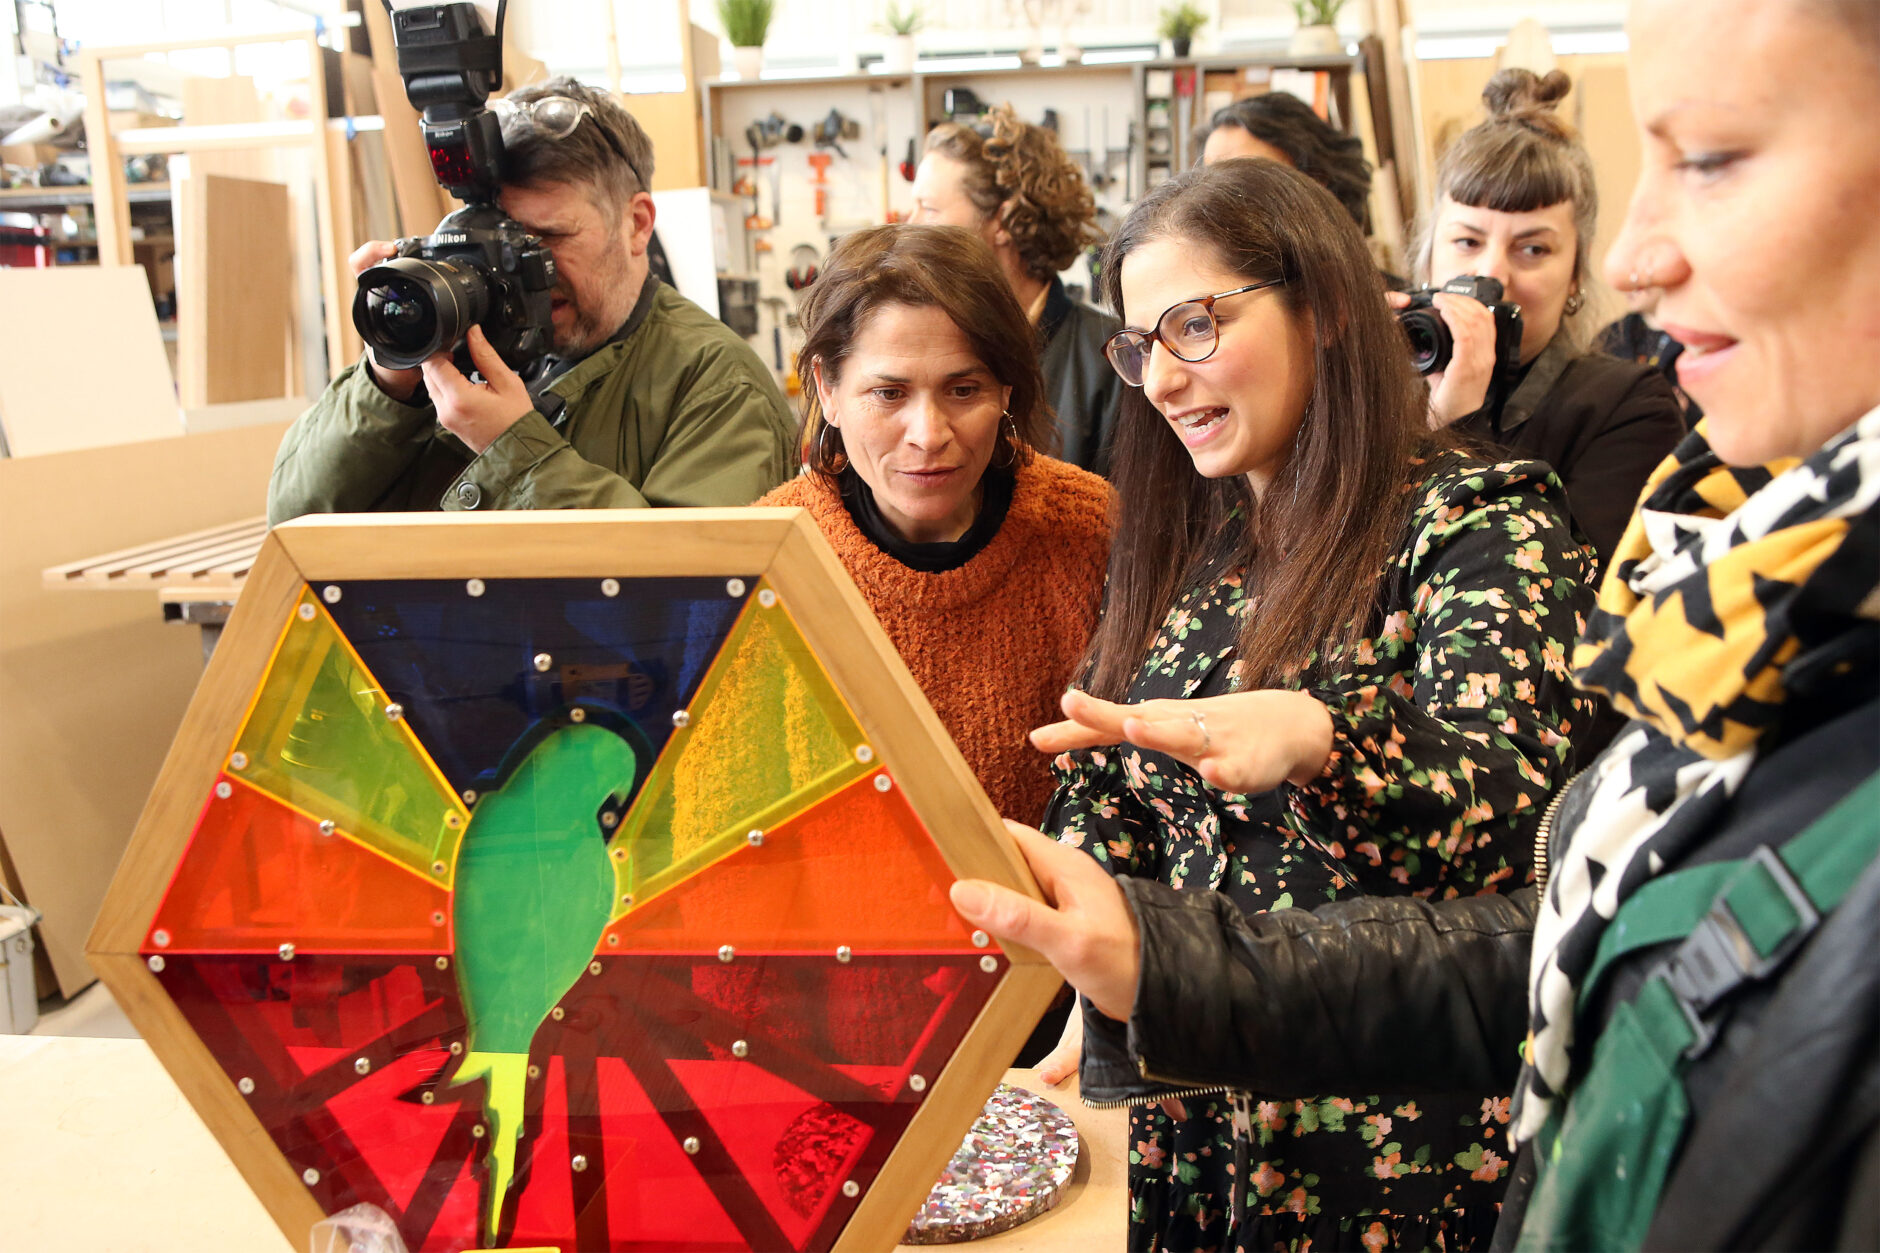 Manilo Seco, Workshop Manager, and Lizzie Fleming, founder, Made From Scratch, which creates adventure playgrounds, show their work to Nesil Caliskan, Leader, Enfield Council, at the launch of Building Bloqs' new open access factory, 10 February 2022. Photo courtesy of Enfield Council.